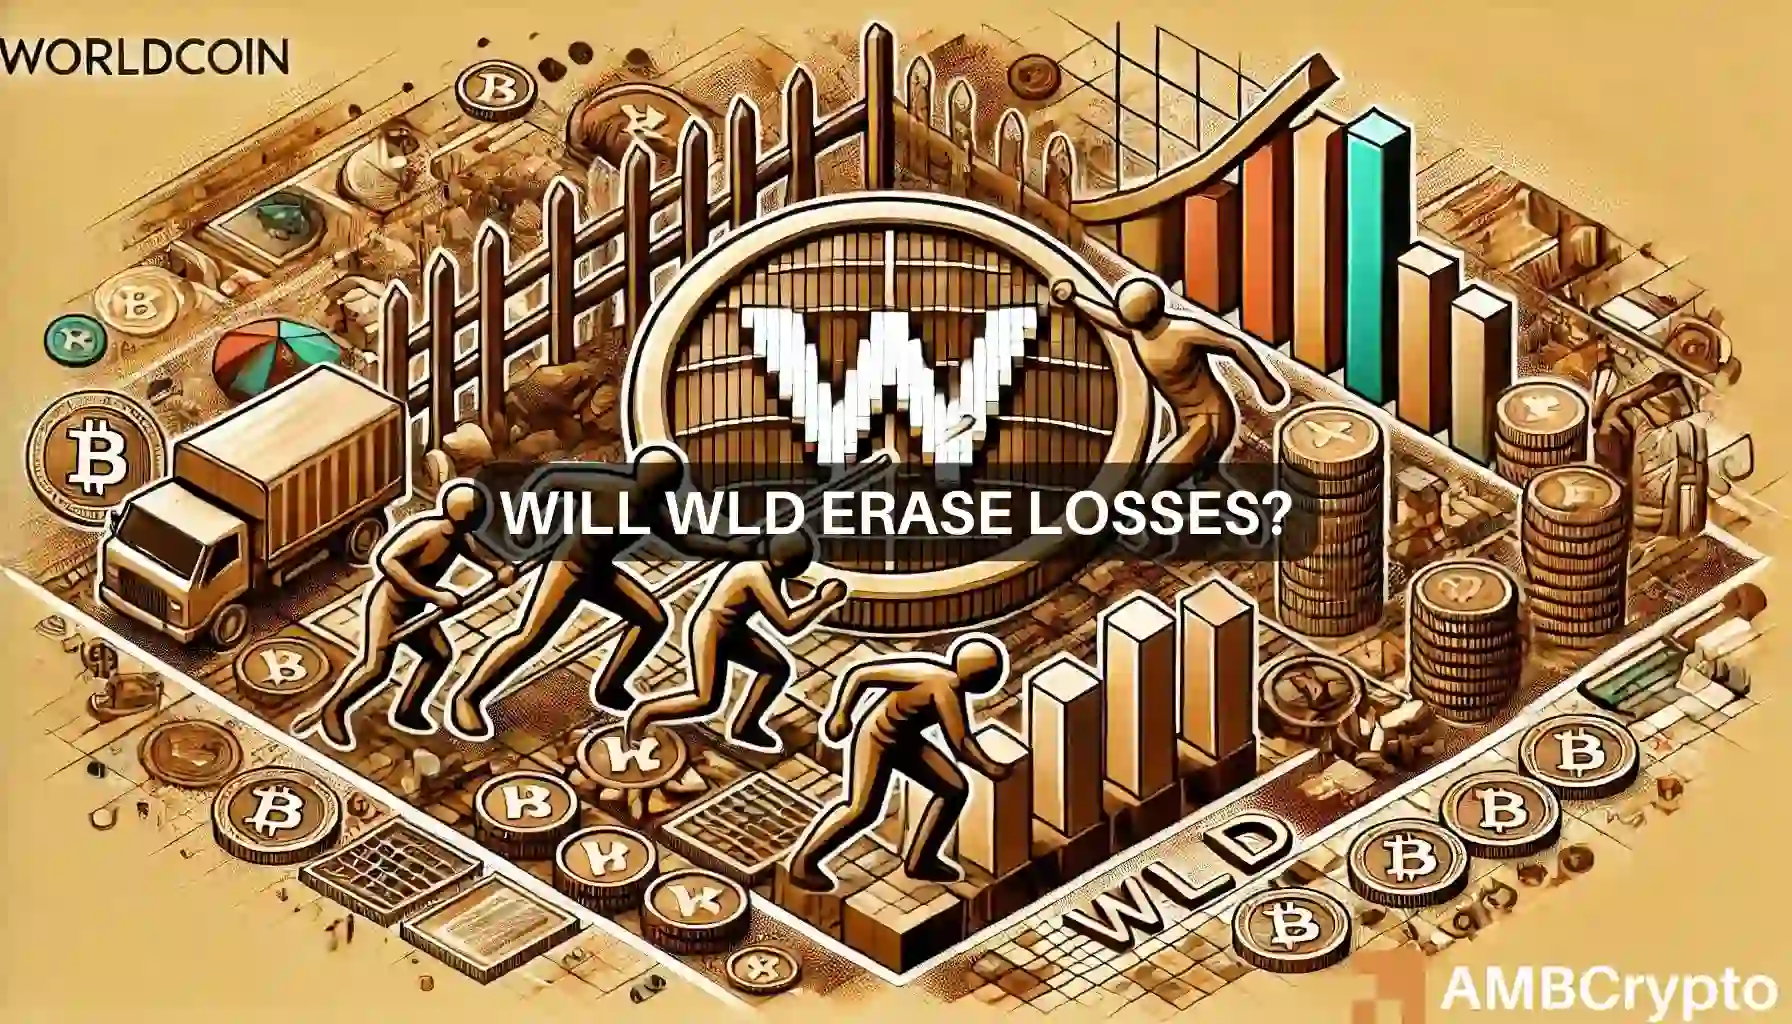 Worldcoin flashes ‘Buy’ signal – Should investors get ready for $3?